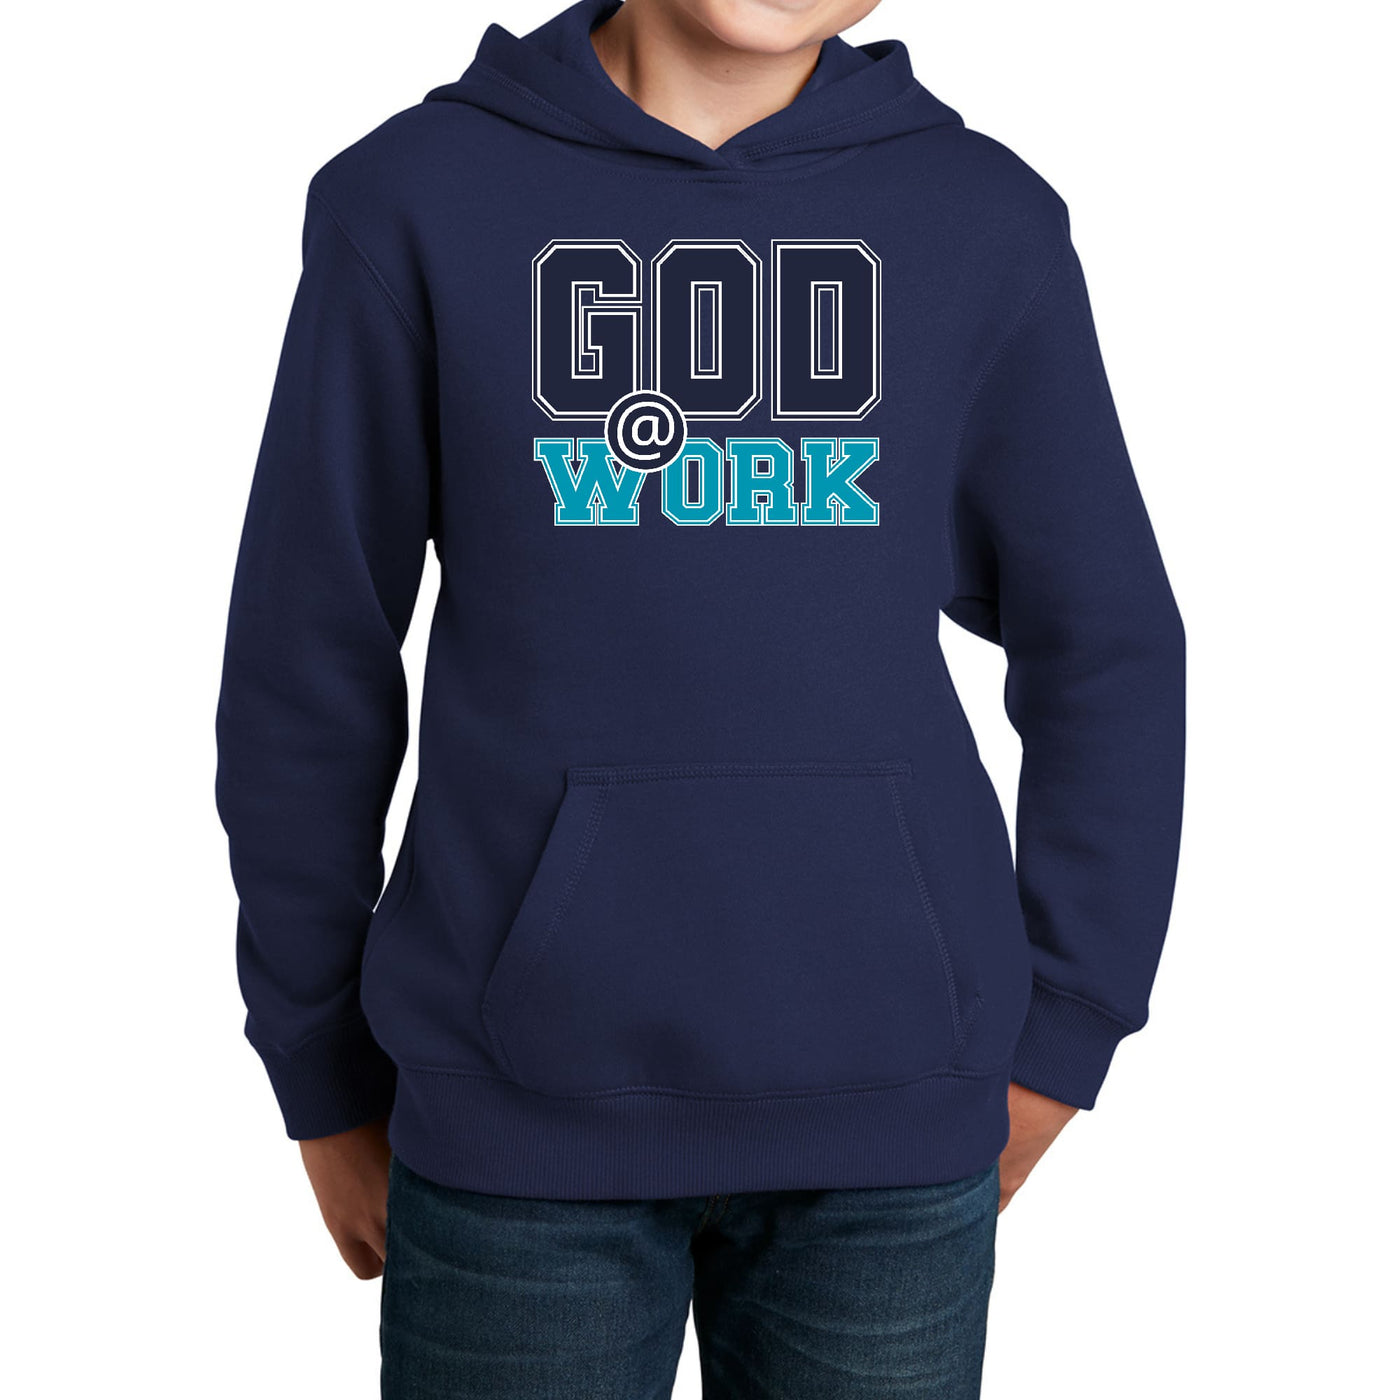 Youth Long Sleeve Hoodie God @ Work Navy Blue And Blue Green Print - Youth